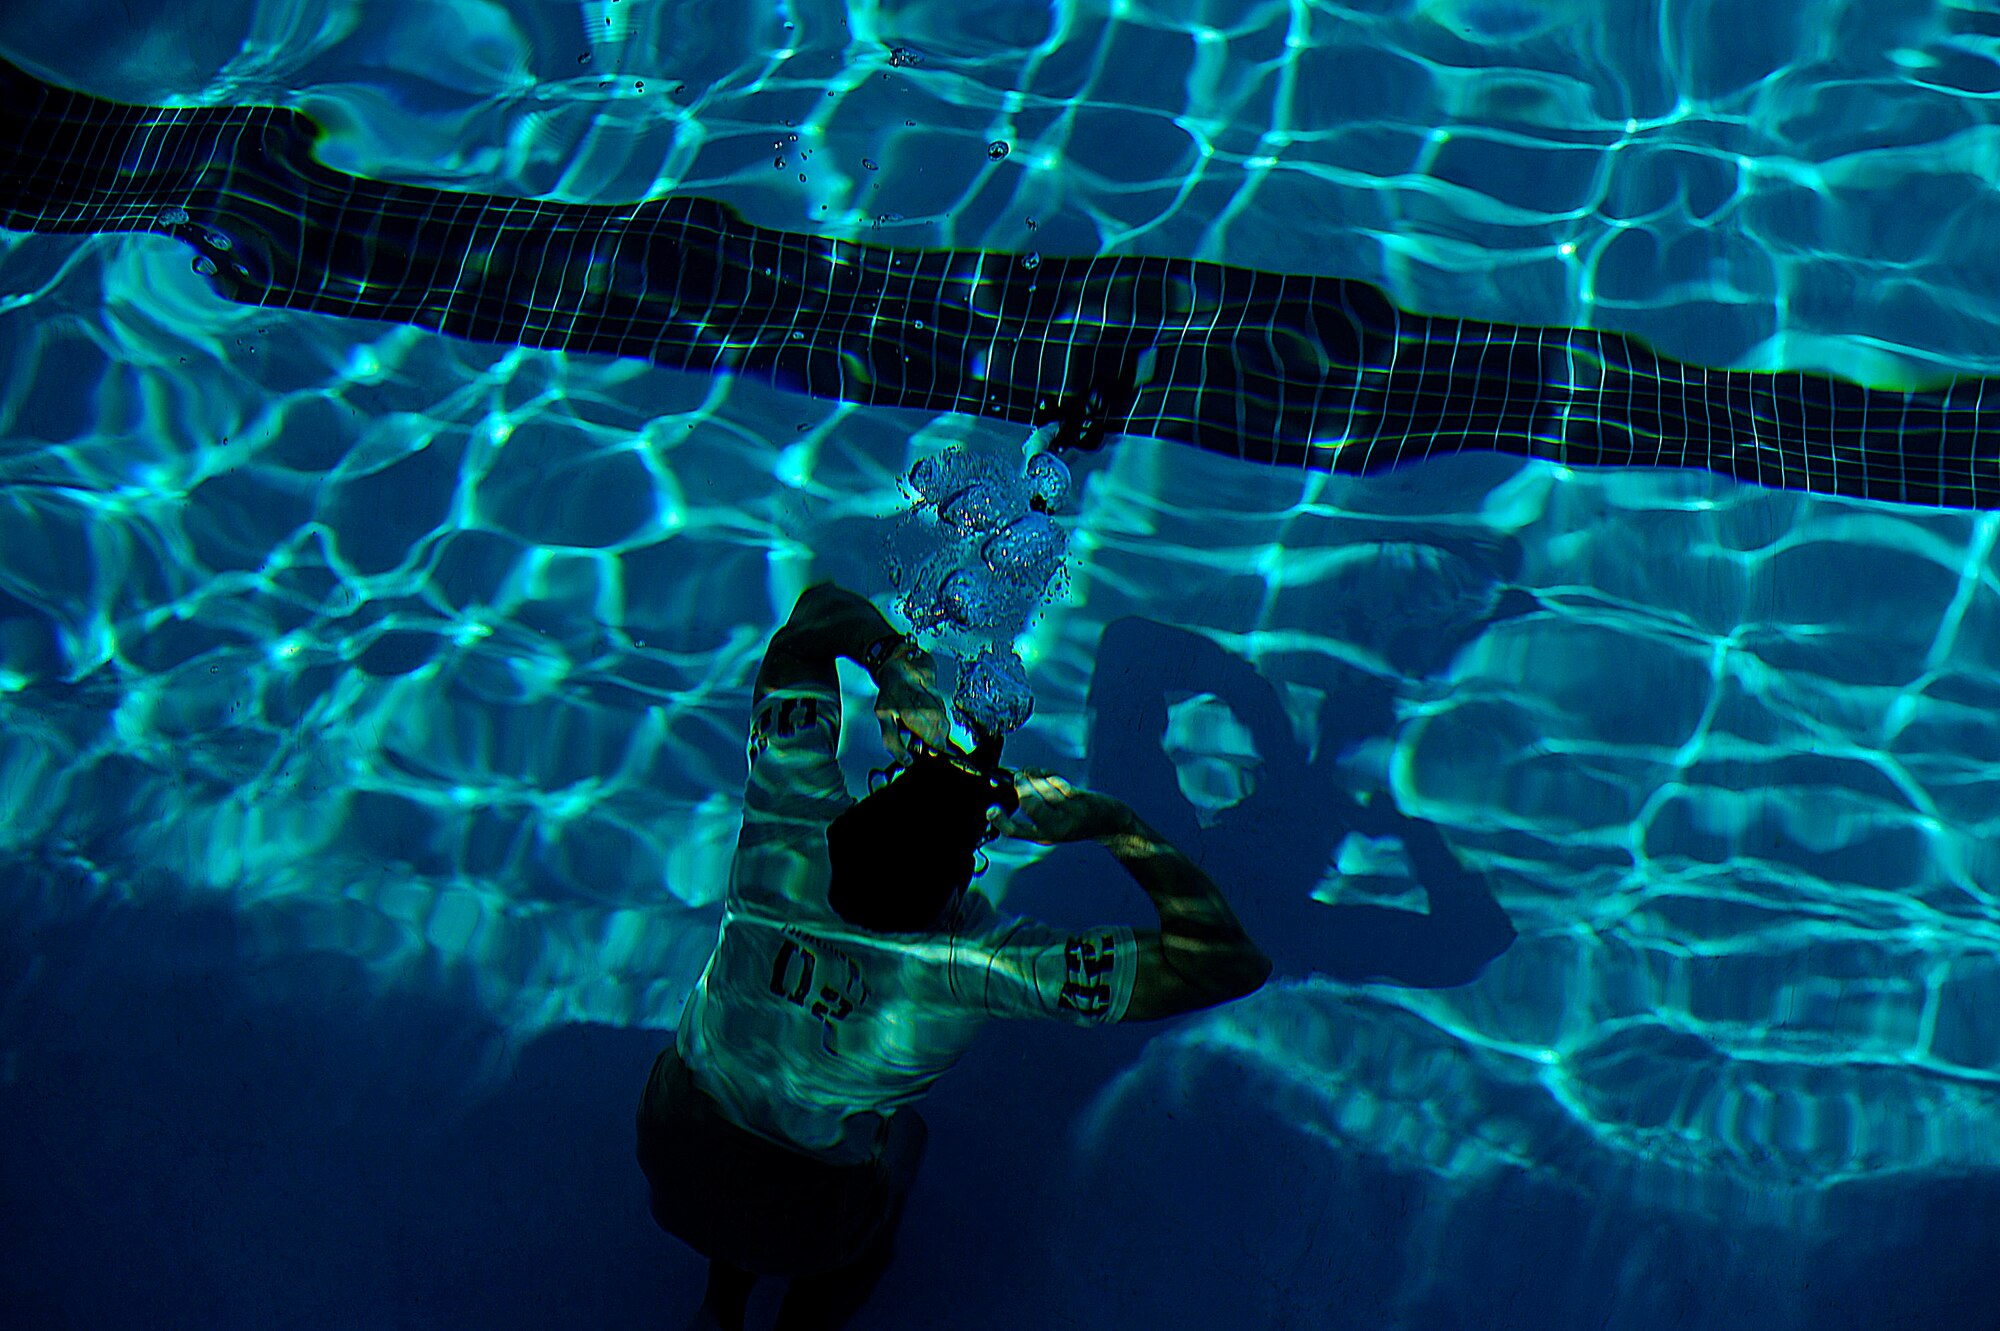 A U.S. Air Force member from the Special Tactics Training Squadron, Air Force Special Operations Command, Hurlburt Field, Fla., clears his mask from the bottom of the pool during pre-scuba training Sept. 21, 2010. (U.S. Air Force Photo by Master Sgt. Russell E Cooley IV/Released)